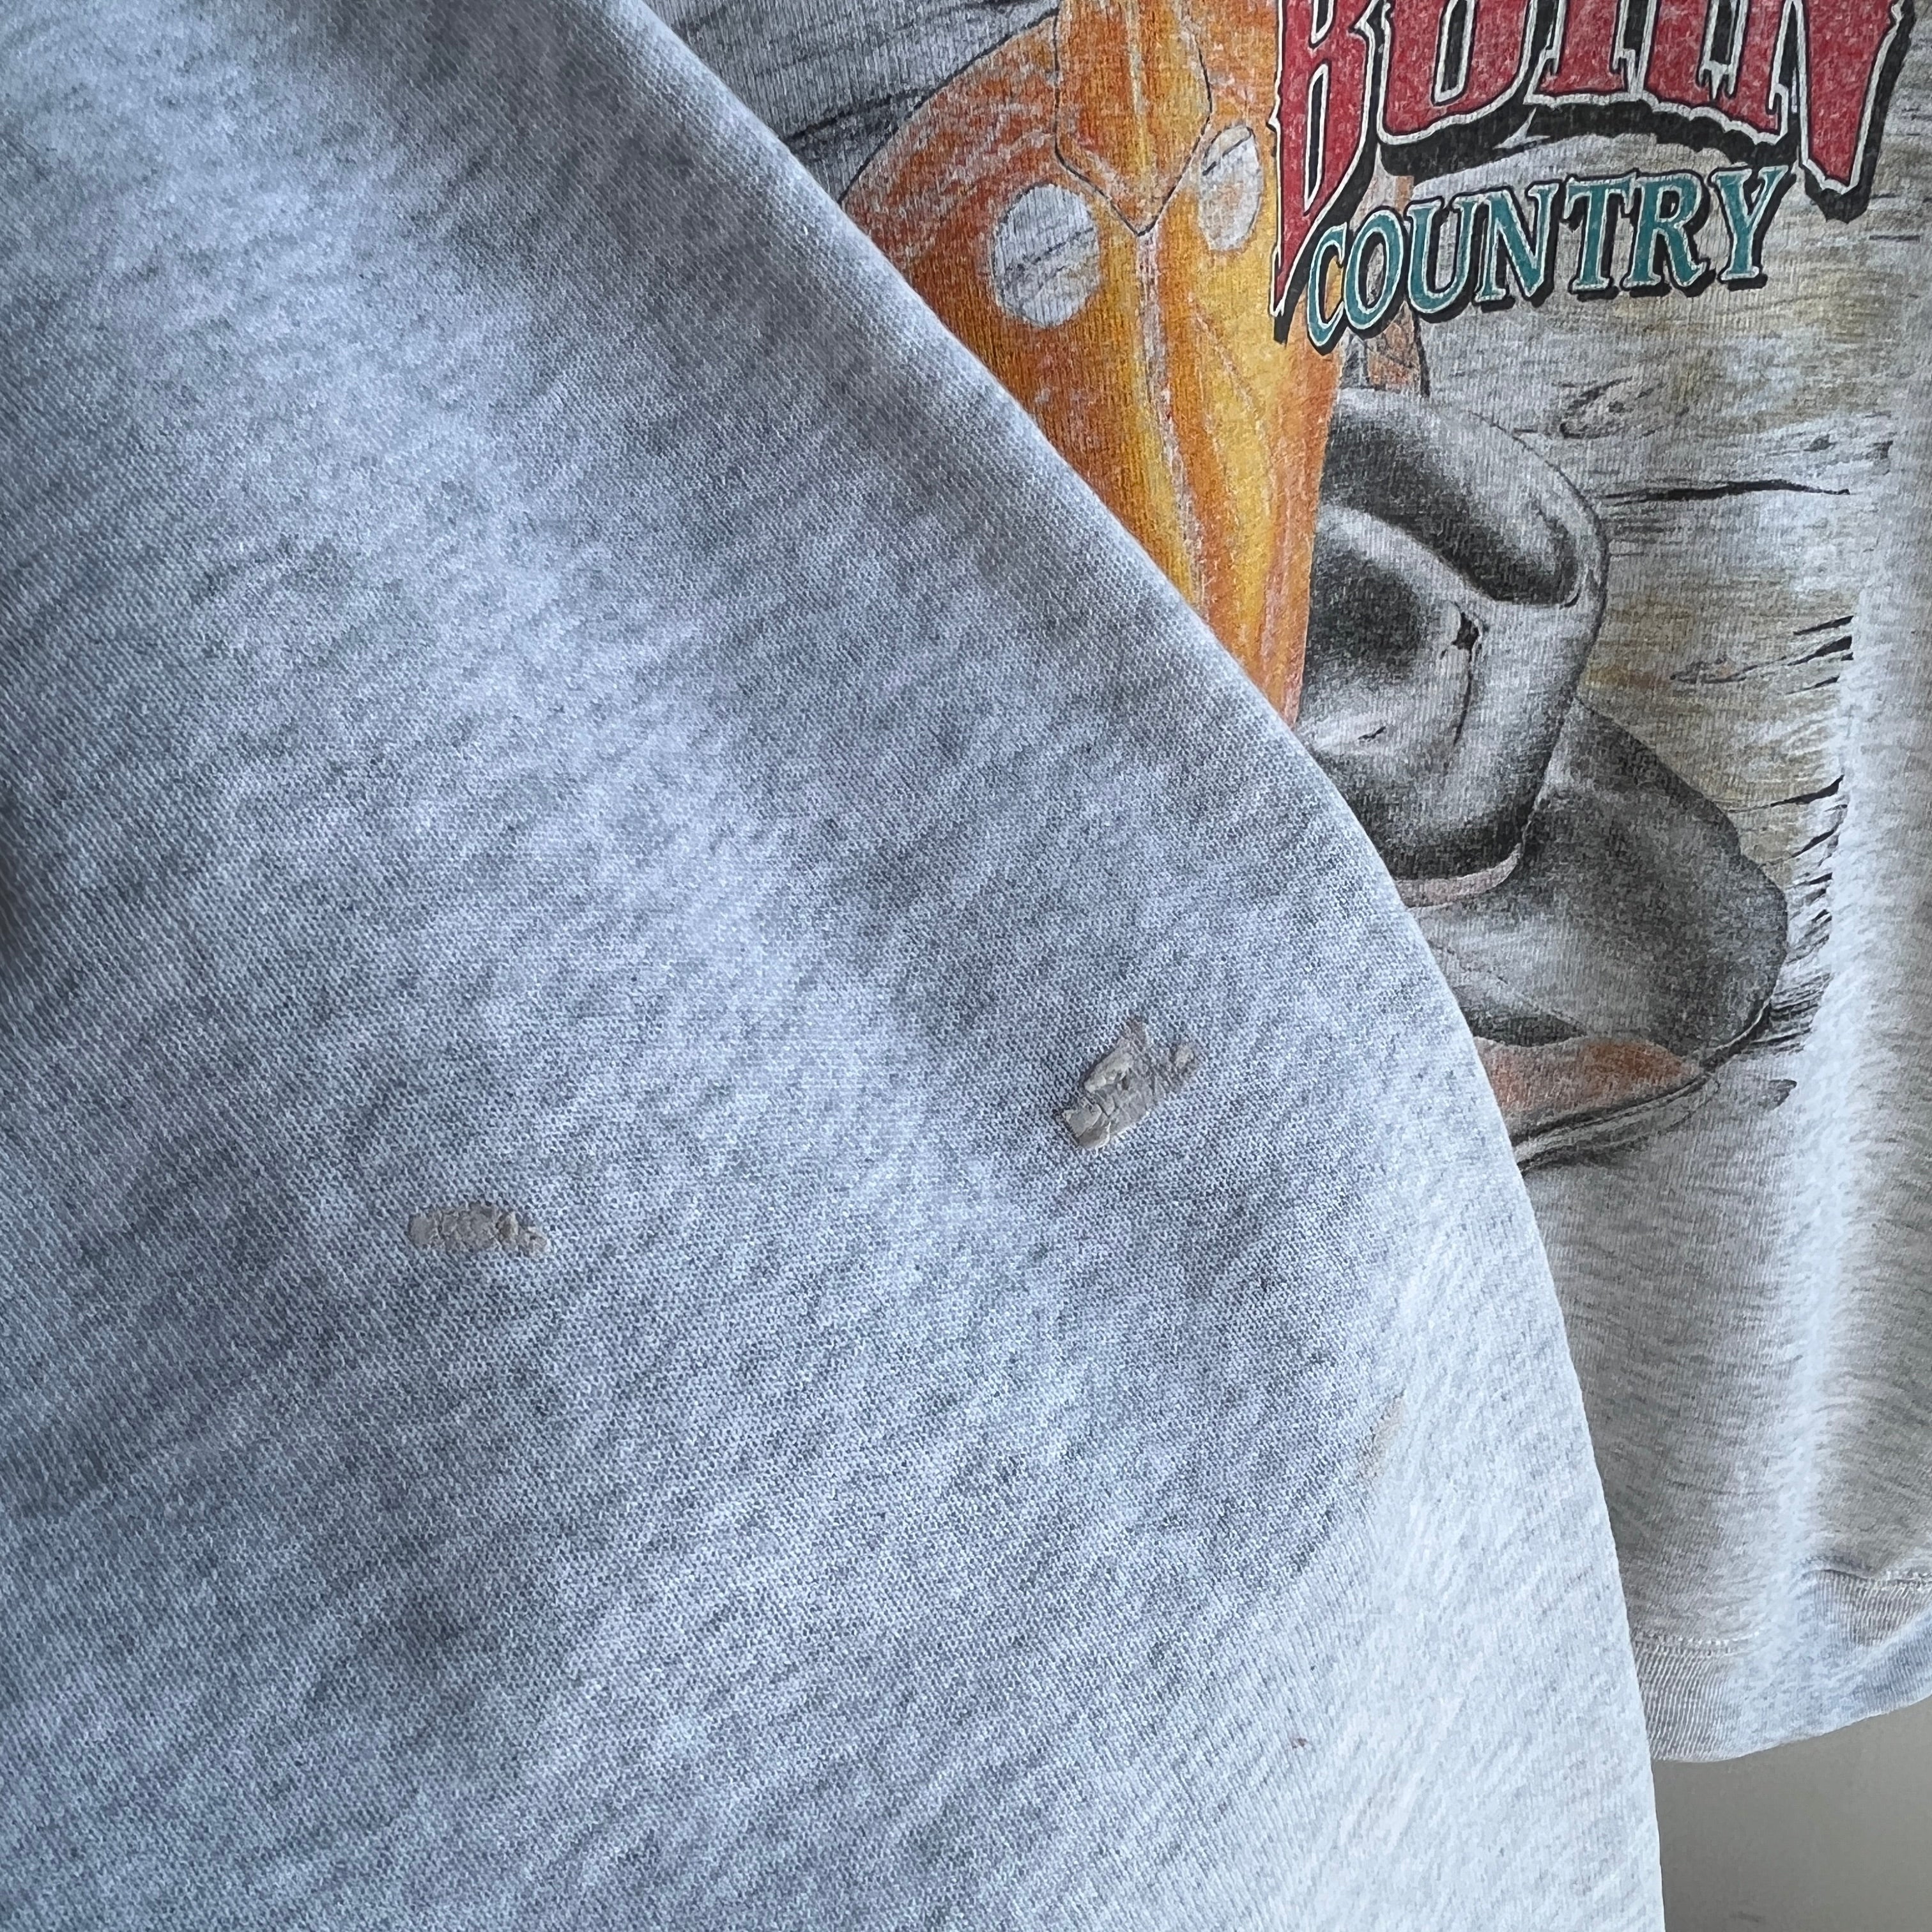 1990s Born Country Faded and Worn Sweatshirt